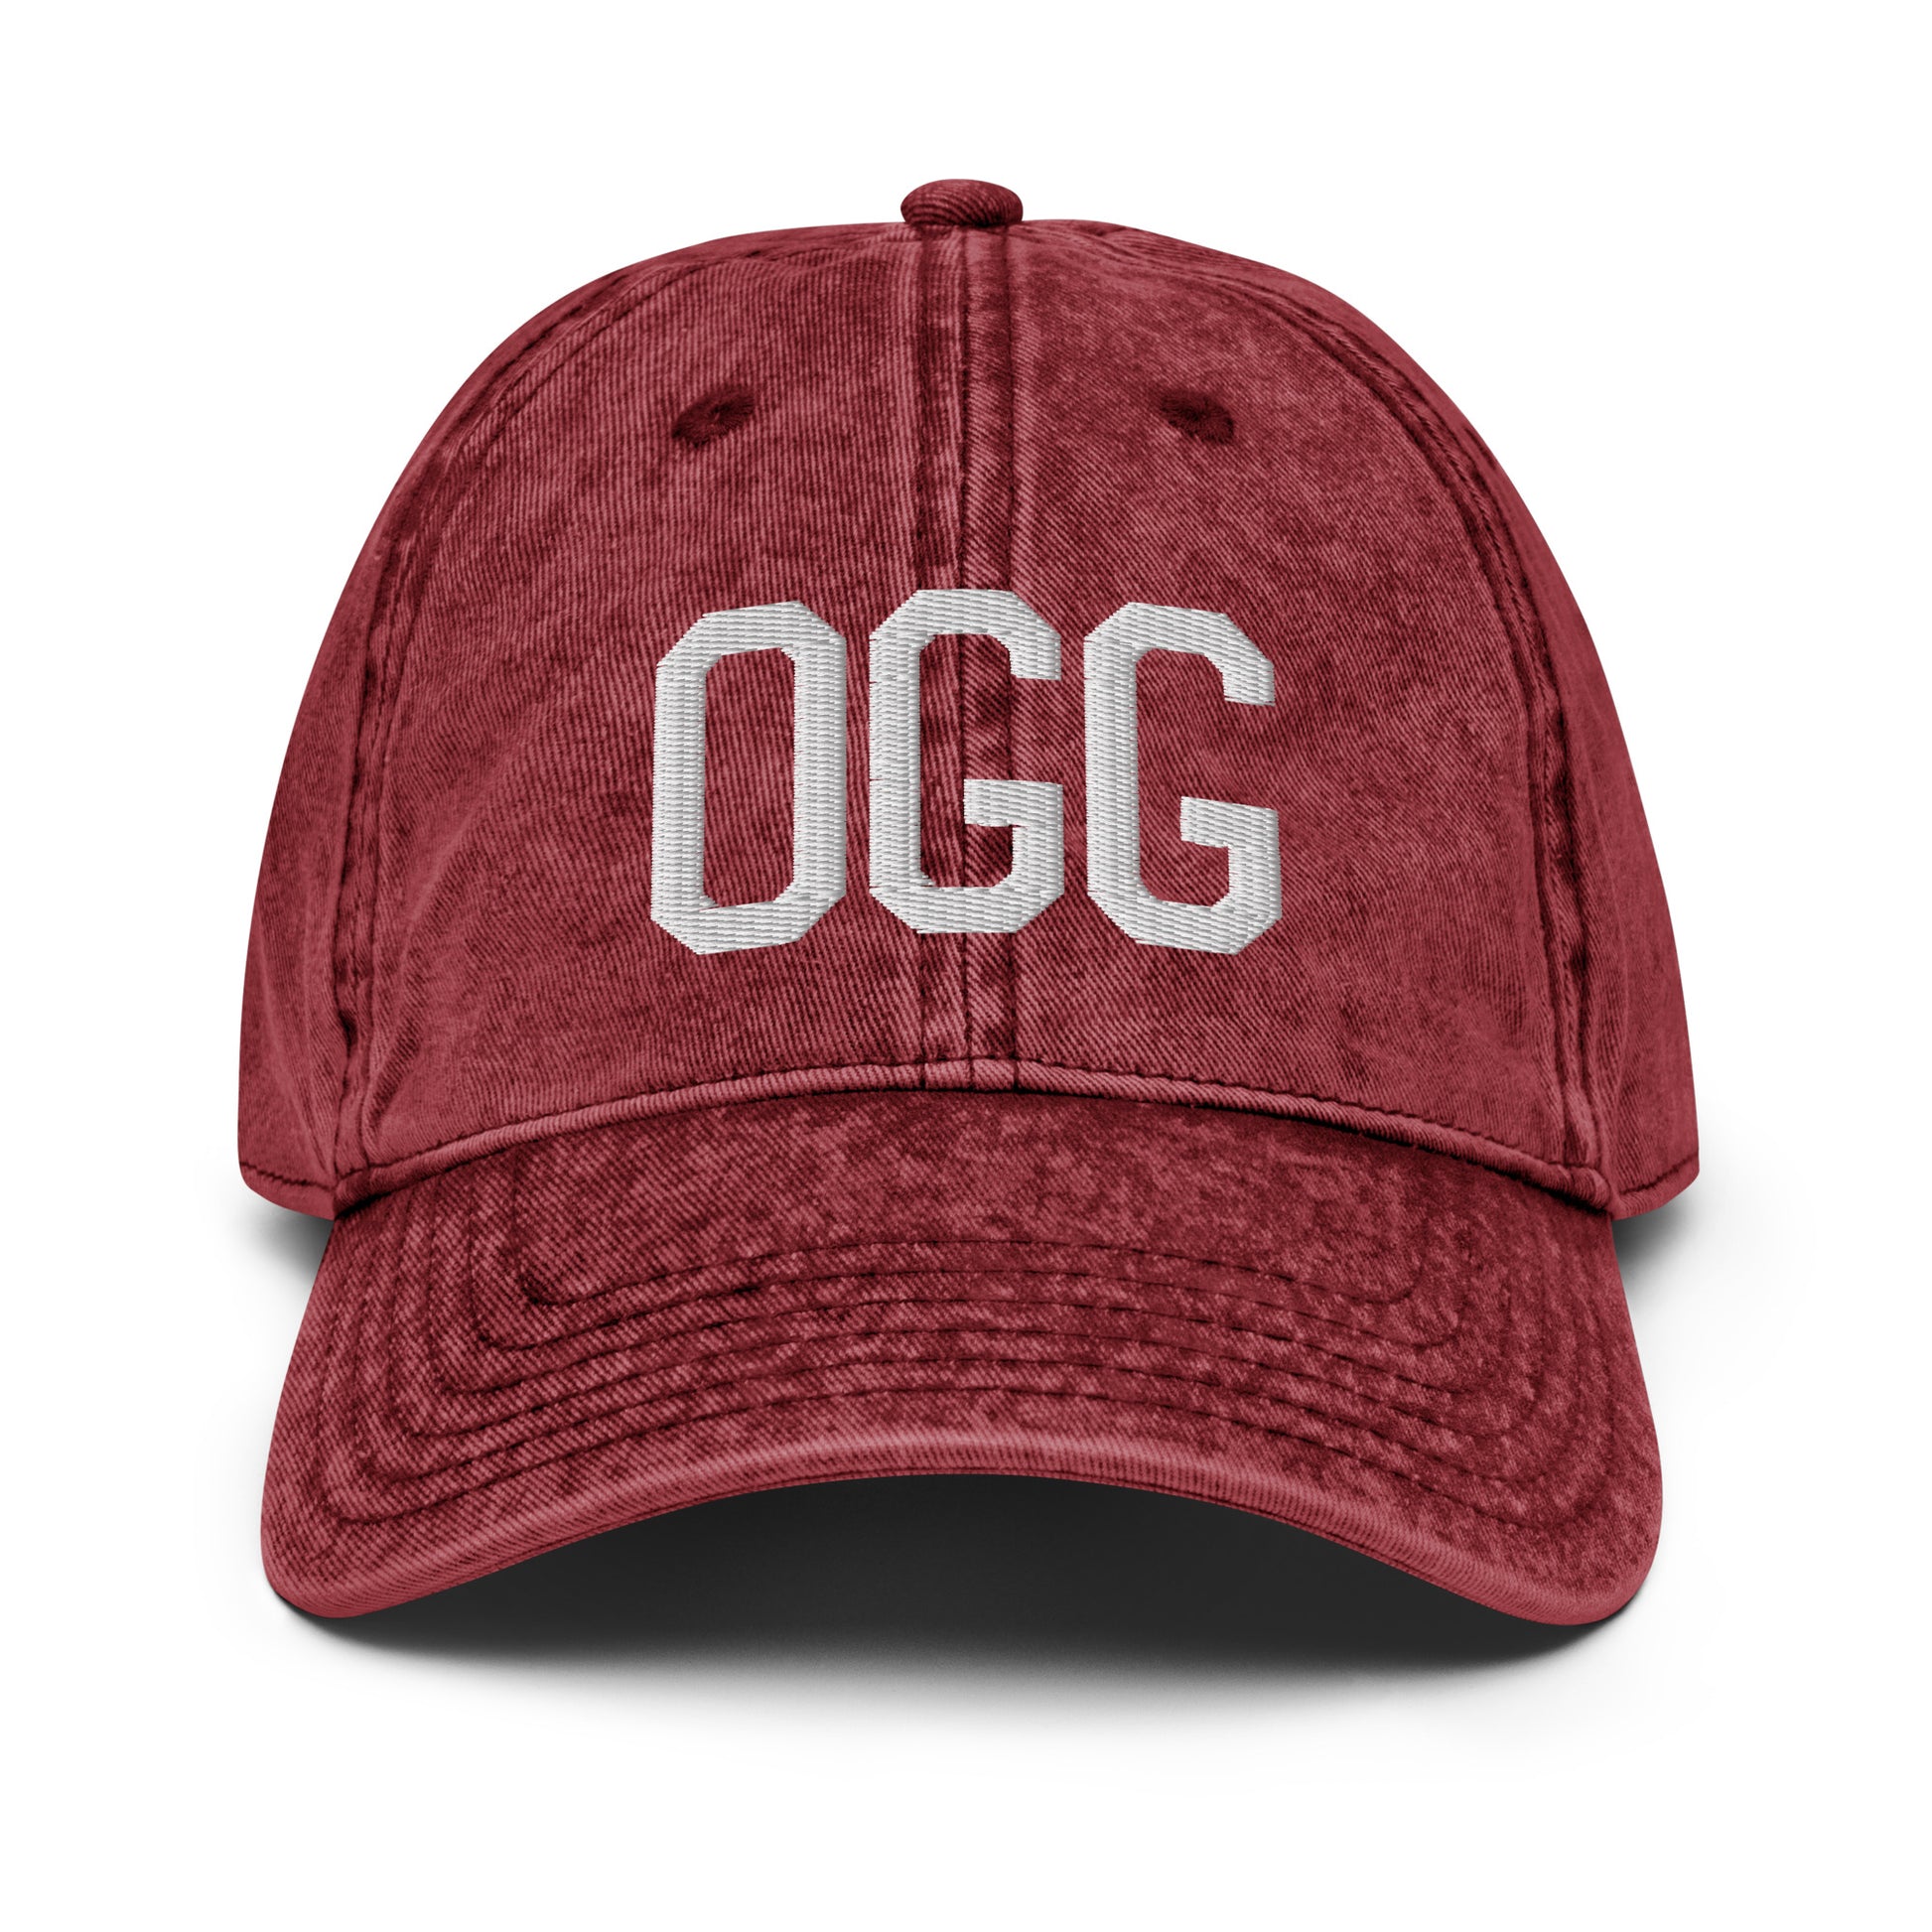 Airport Code Twill Cap - White • OGG Maui • YHM Designs - Image 19